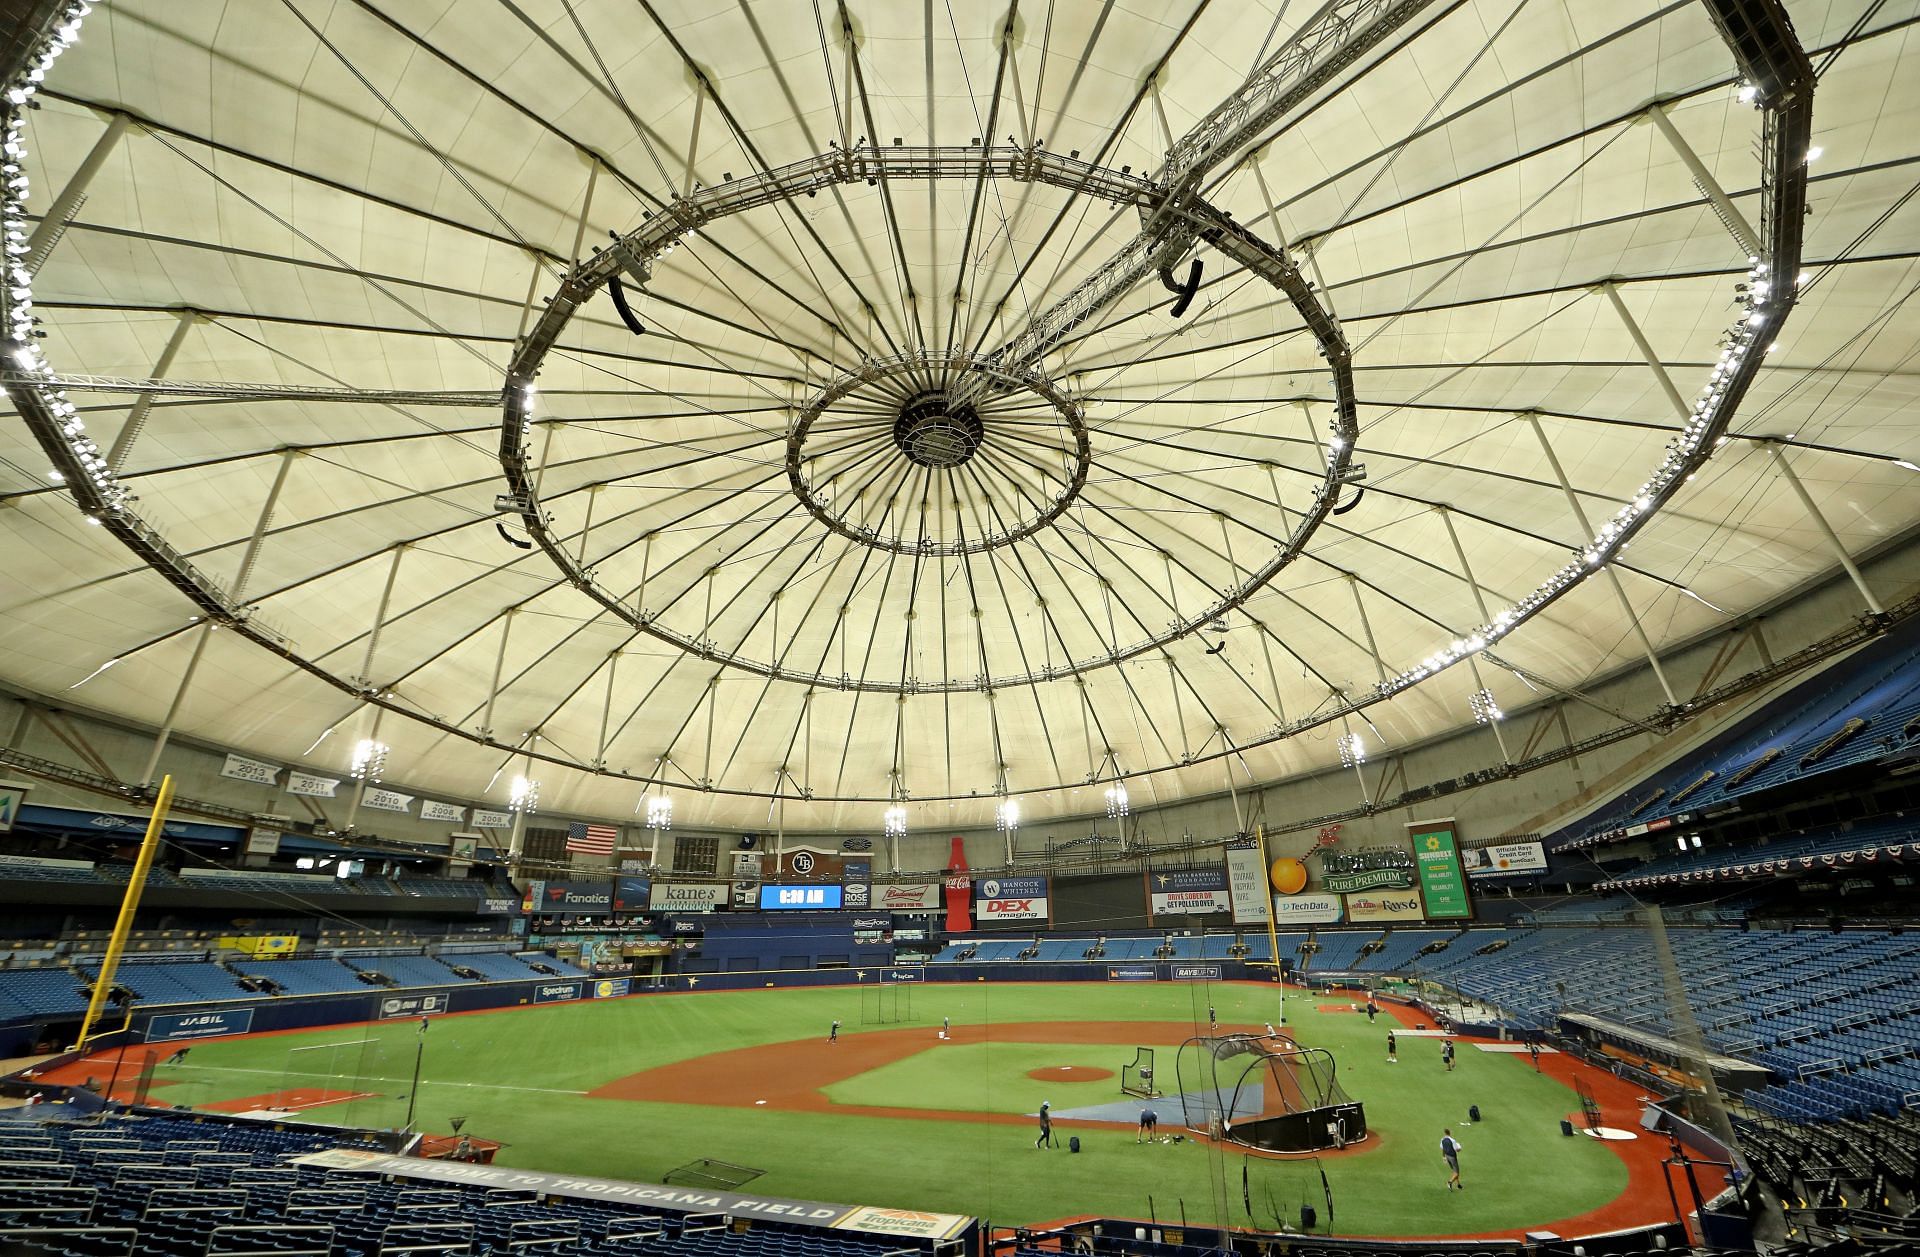 Major announcement expected on new Rays stadium